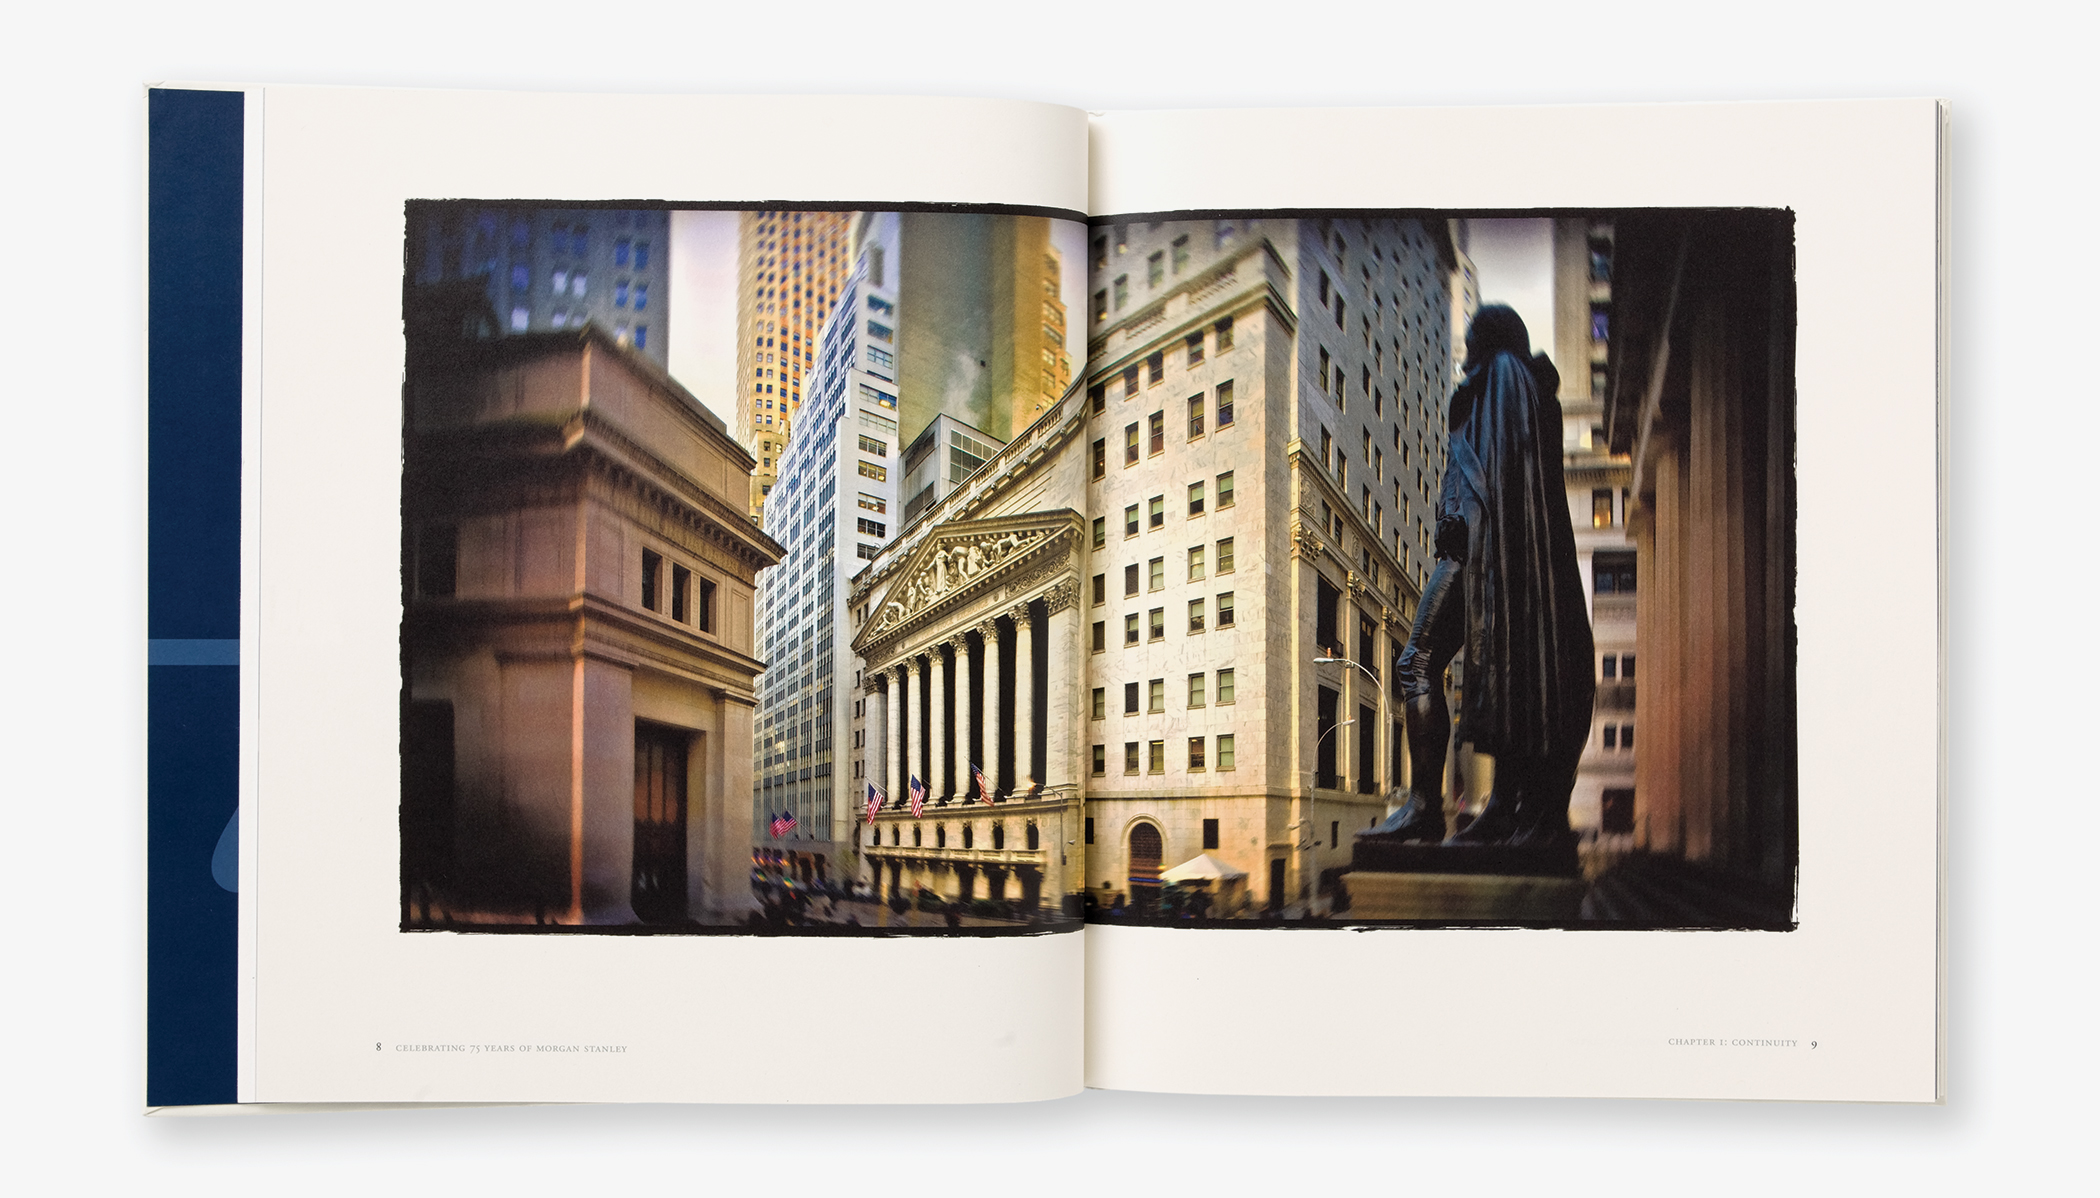 Pages from the Morgan Stanley 75th anniversary commemorative book with iconic images of Wall Street.